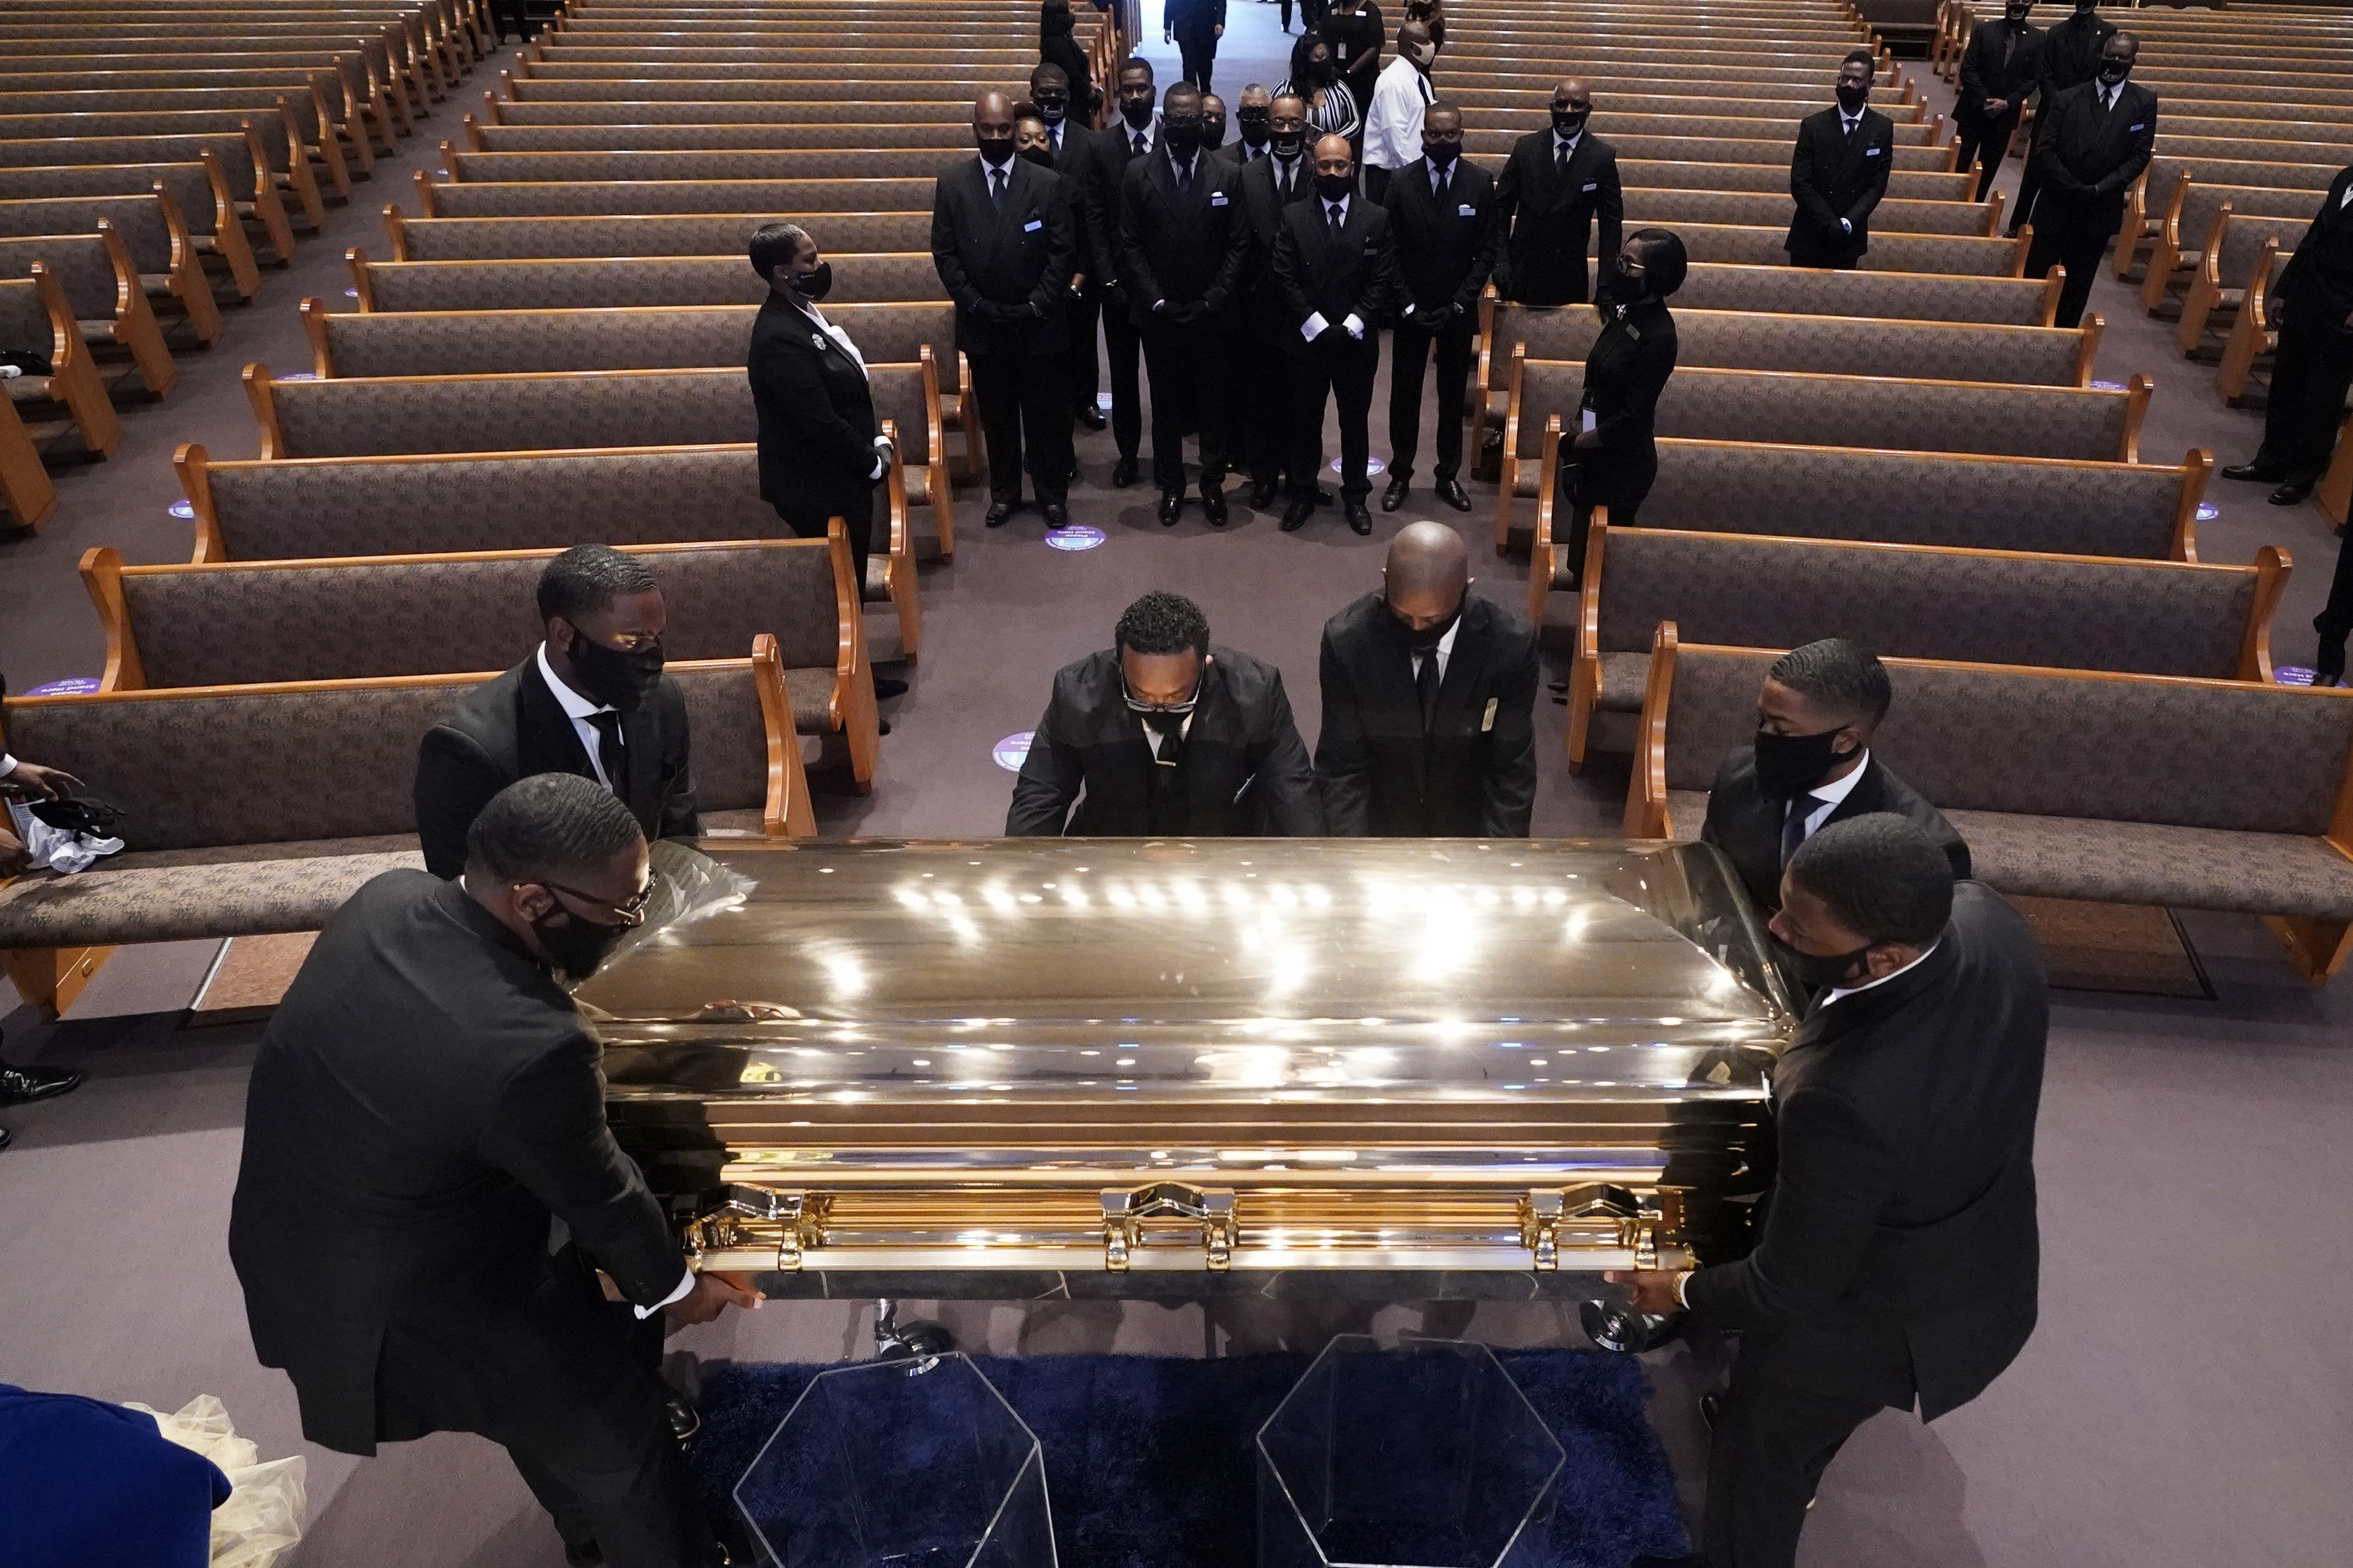 LIVE STREAM: Funeral for George Floyd held in Houston